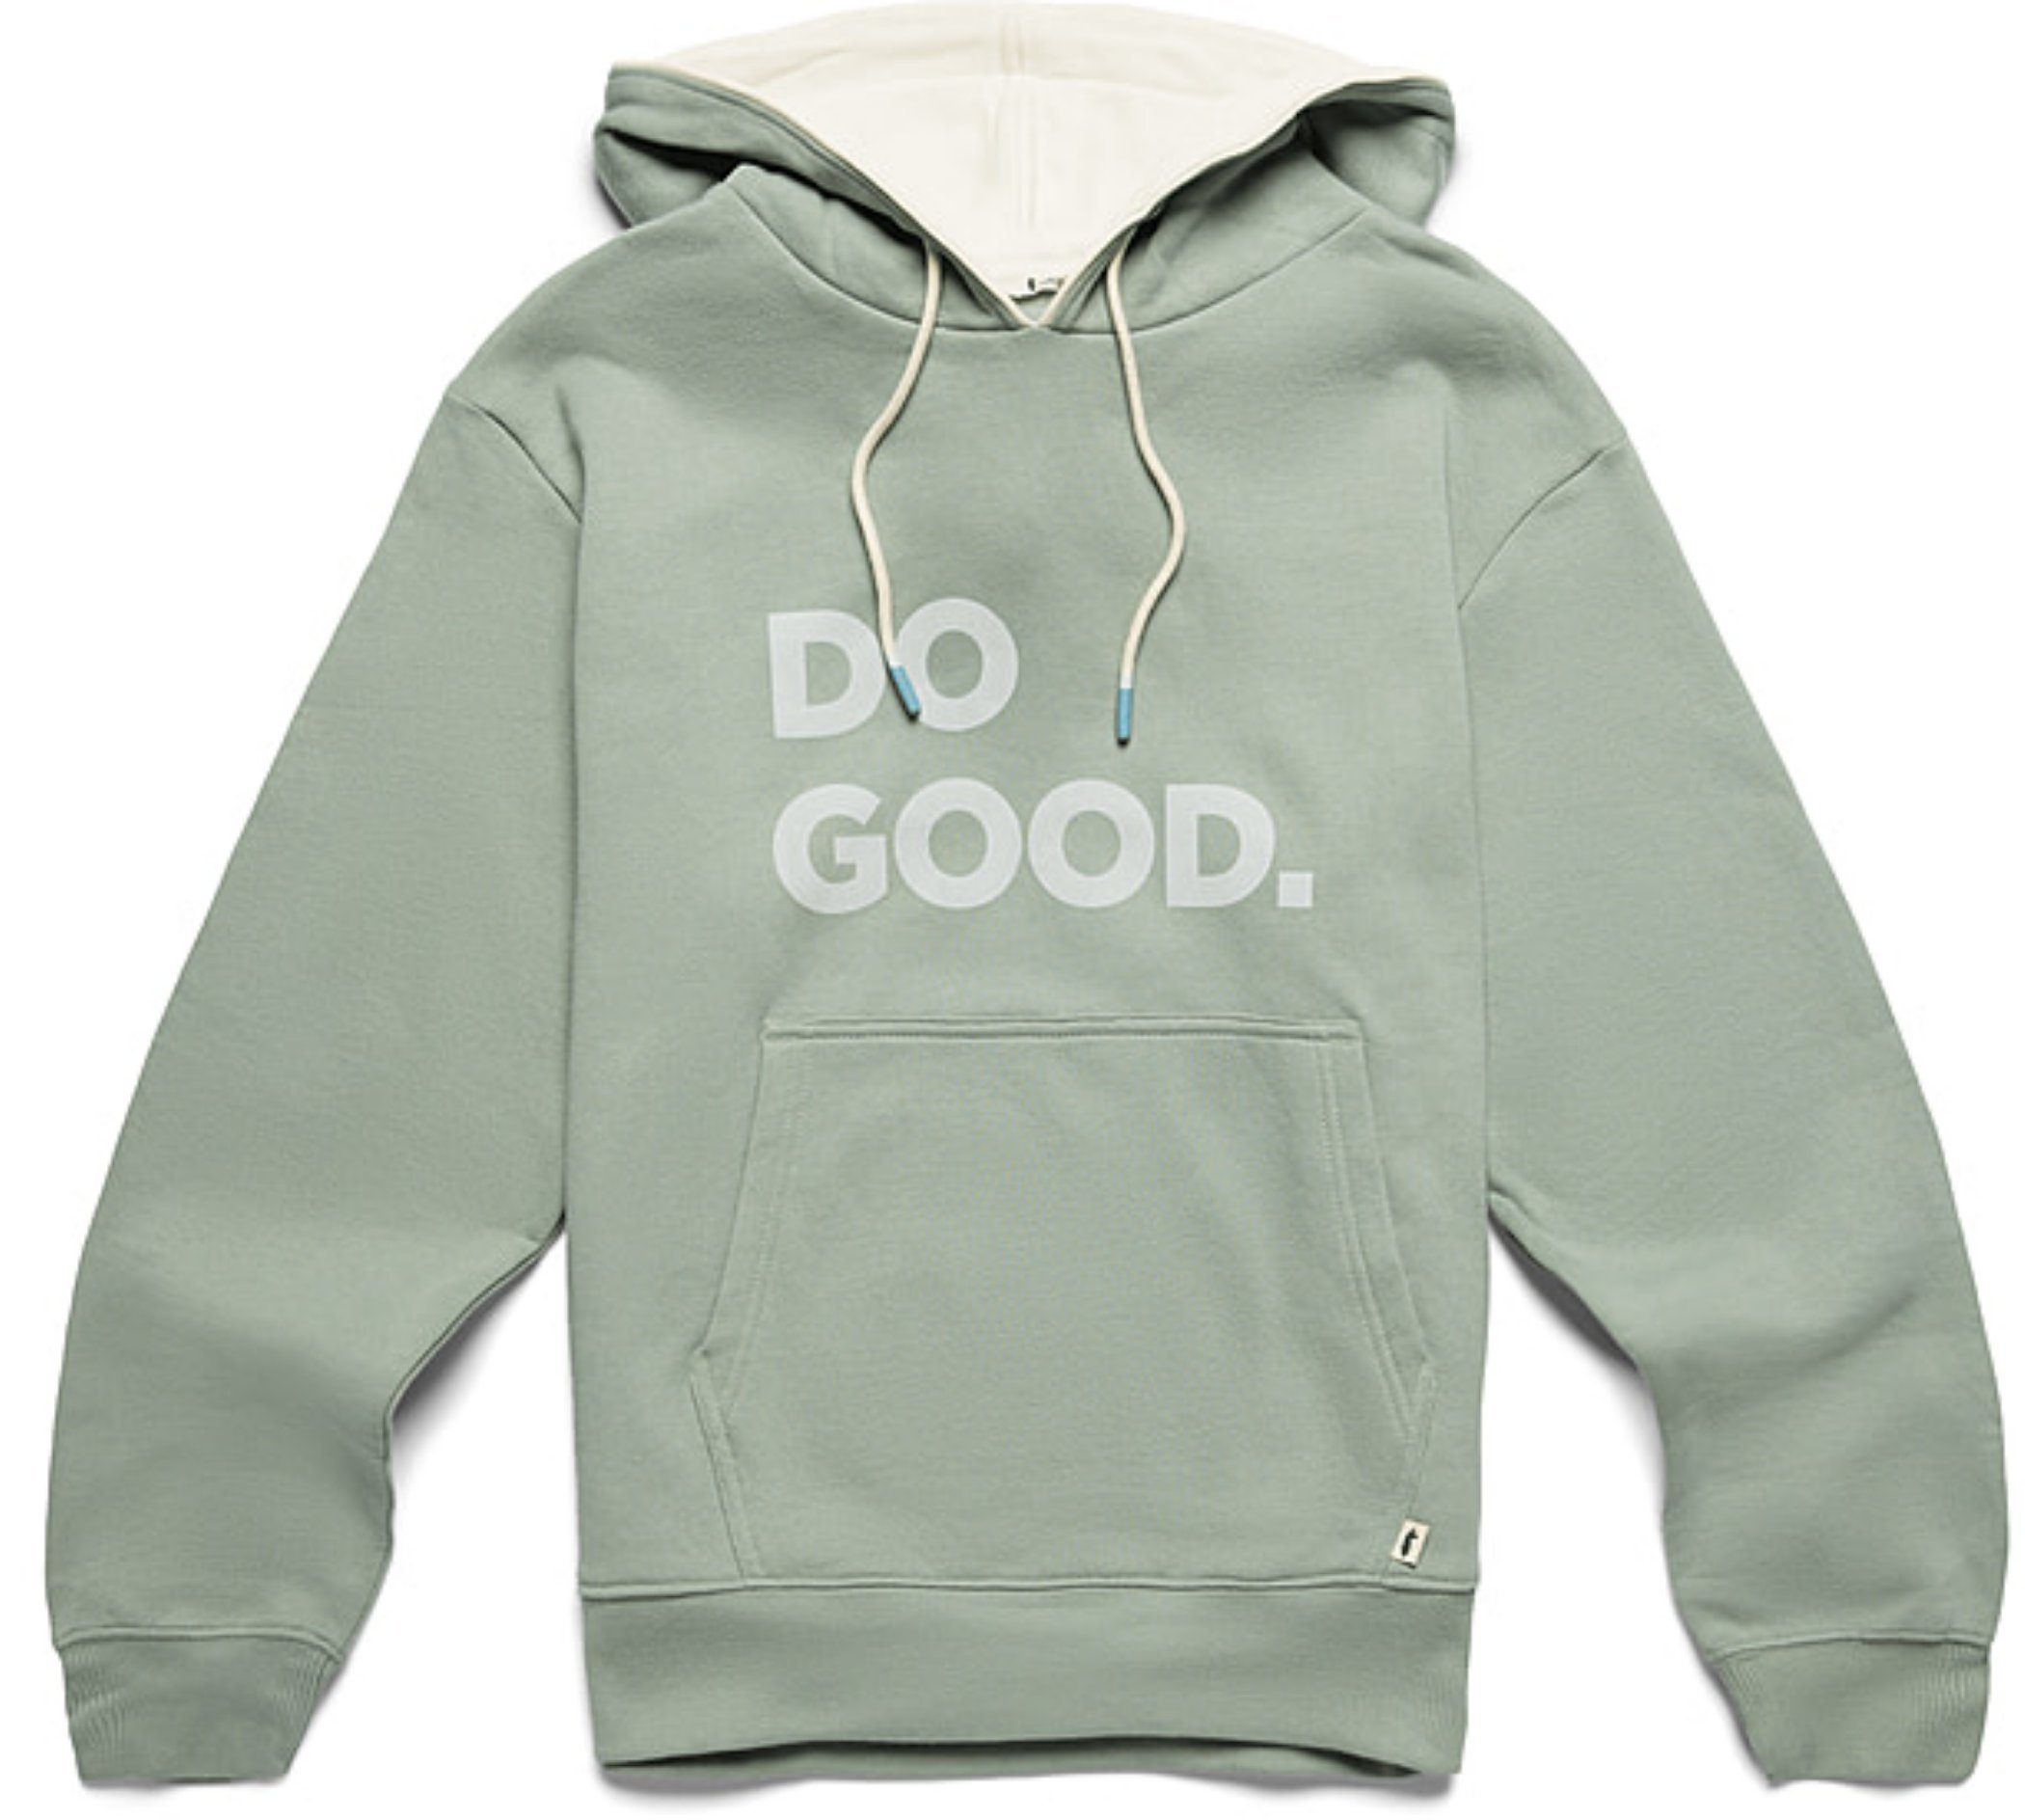 Sweater W GOOD DO HOODIE Cotopaxi